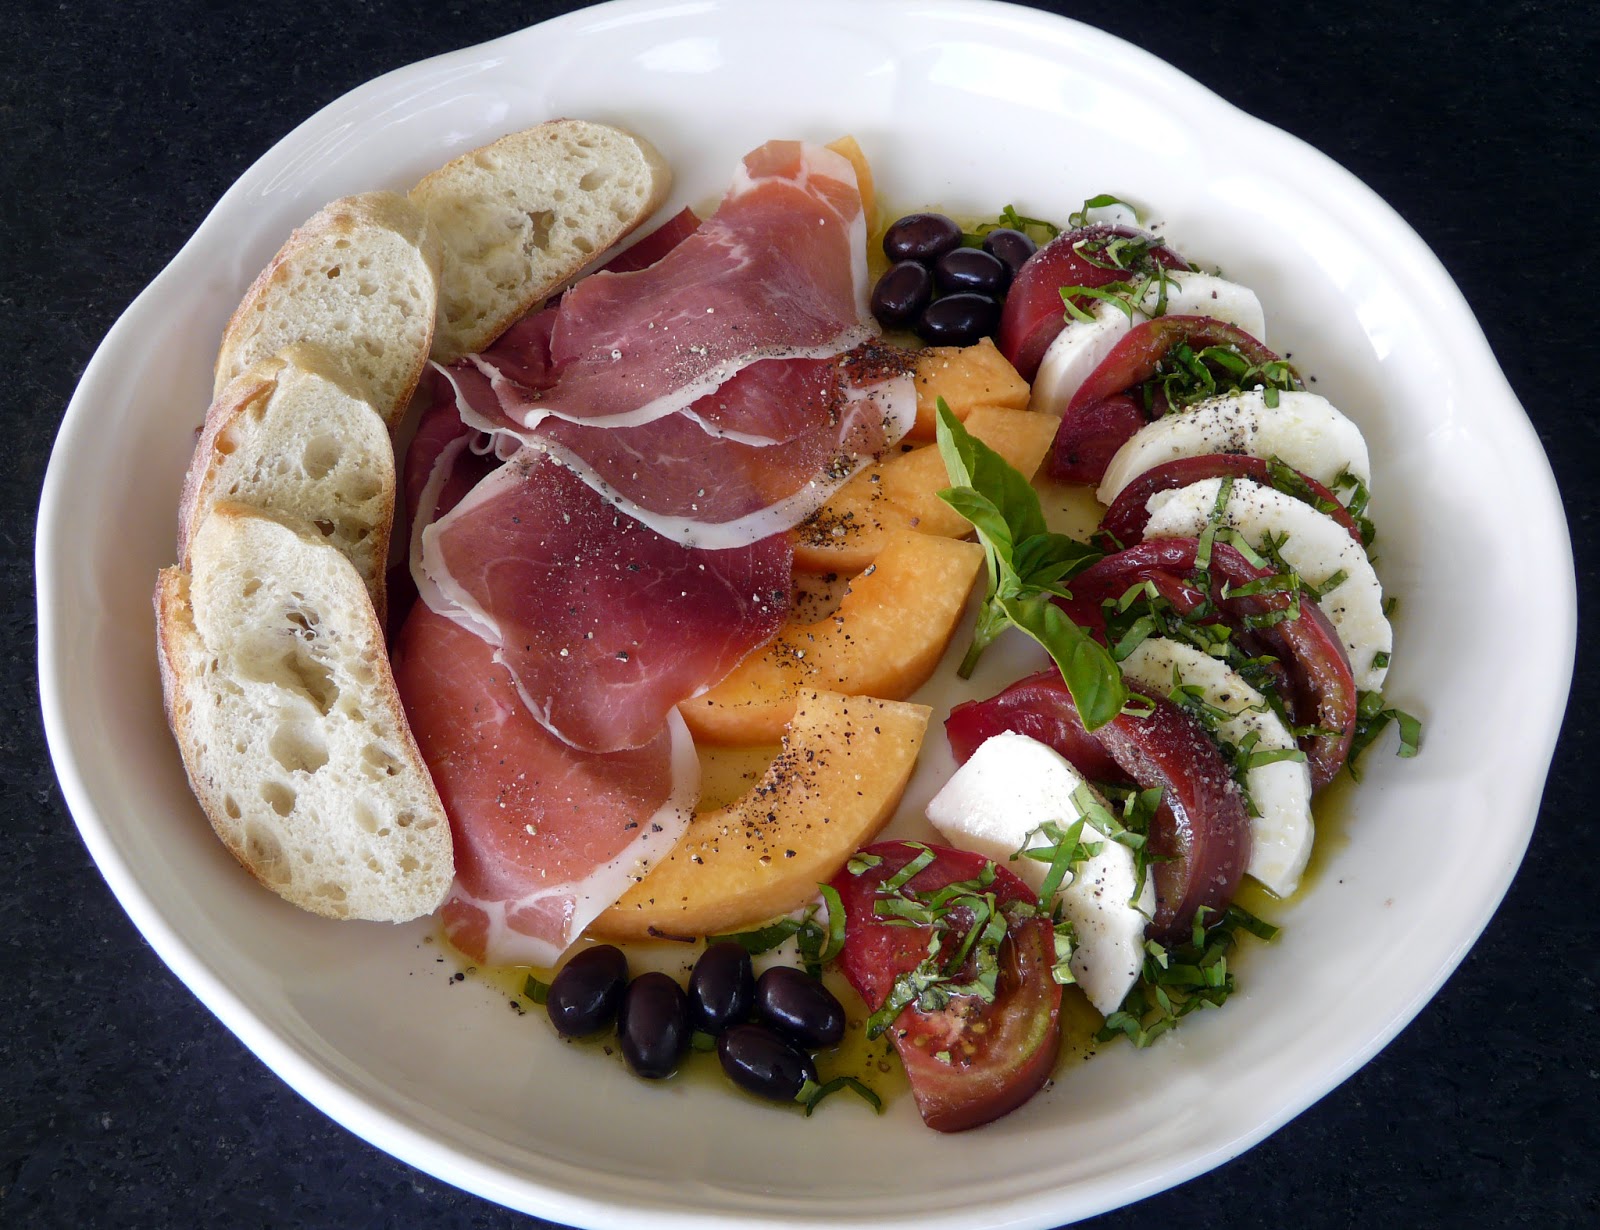 This Antipasto Platter was actually.